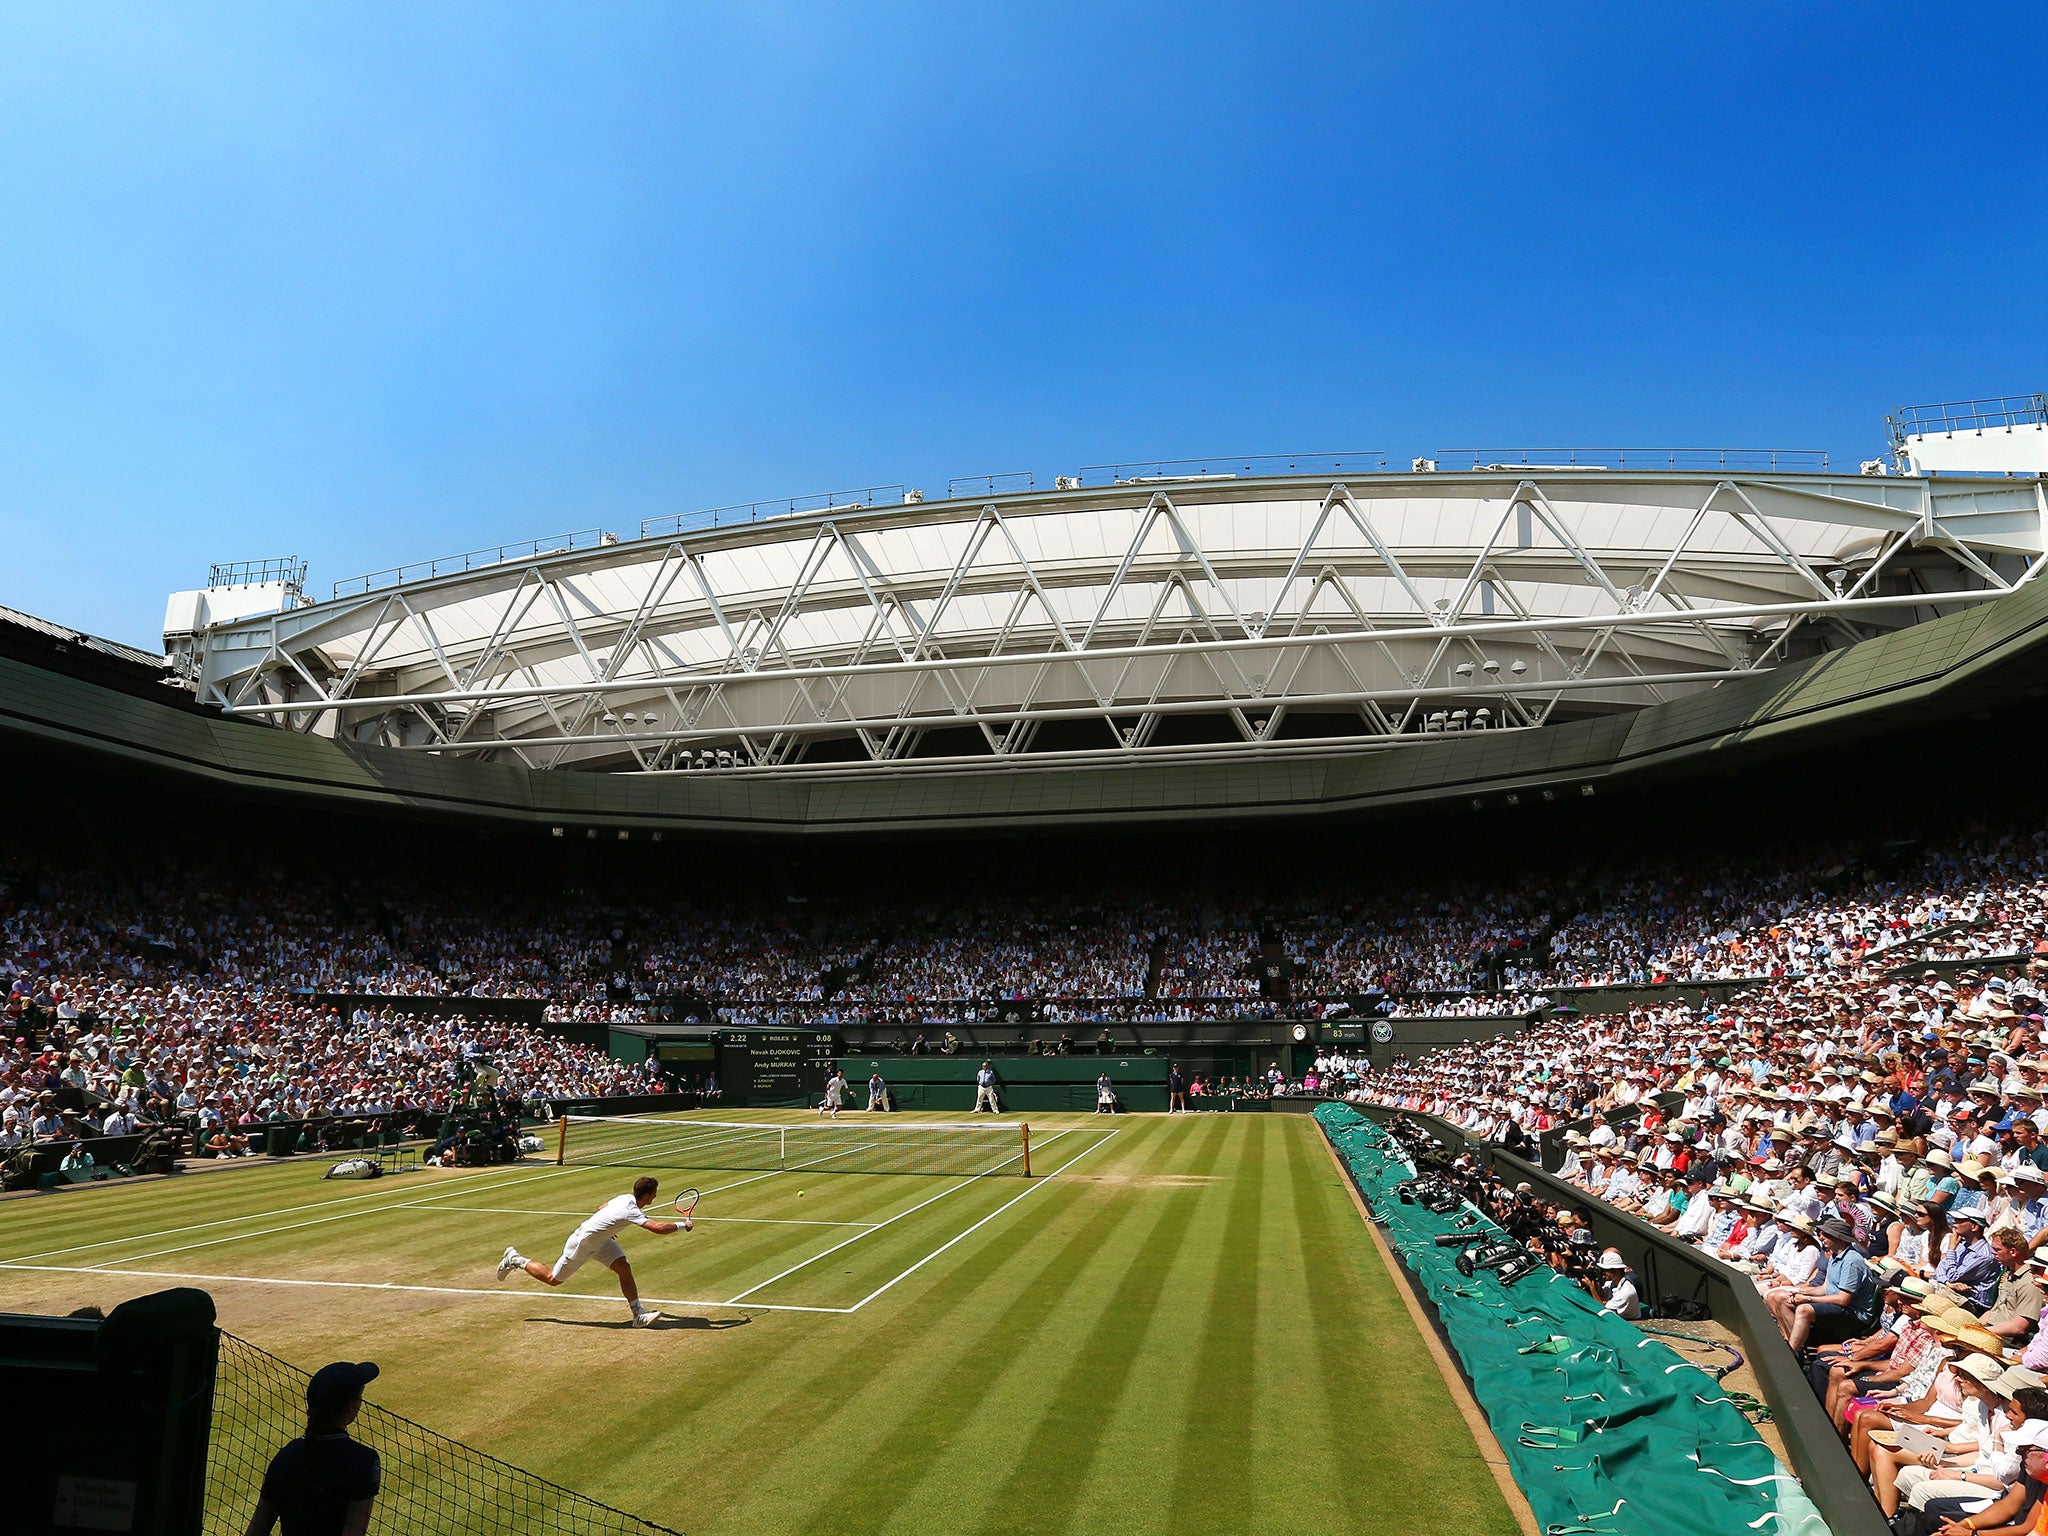 The investigation by BBC and BuzzFeed News alleges match fixing took place at Wimbledon and a number of other top-level tournaments